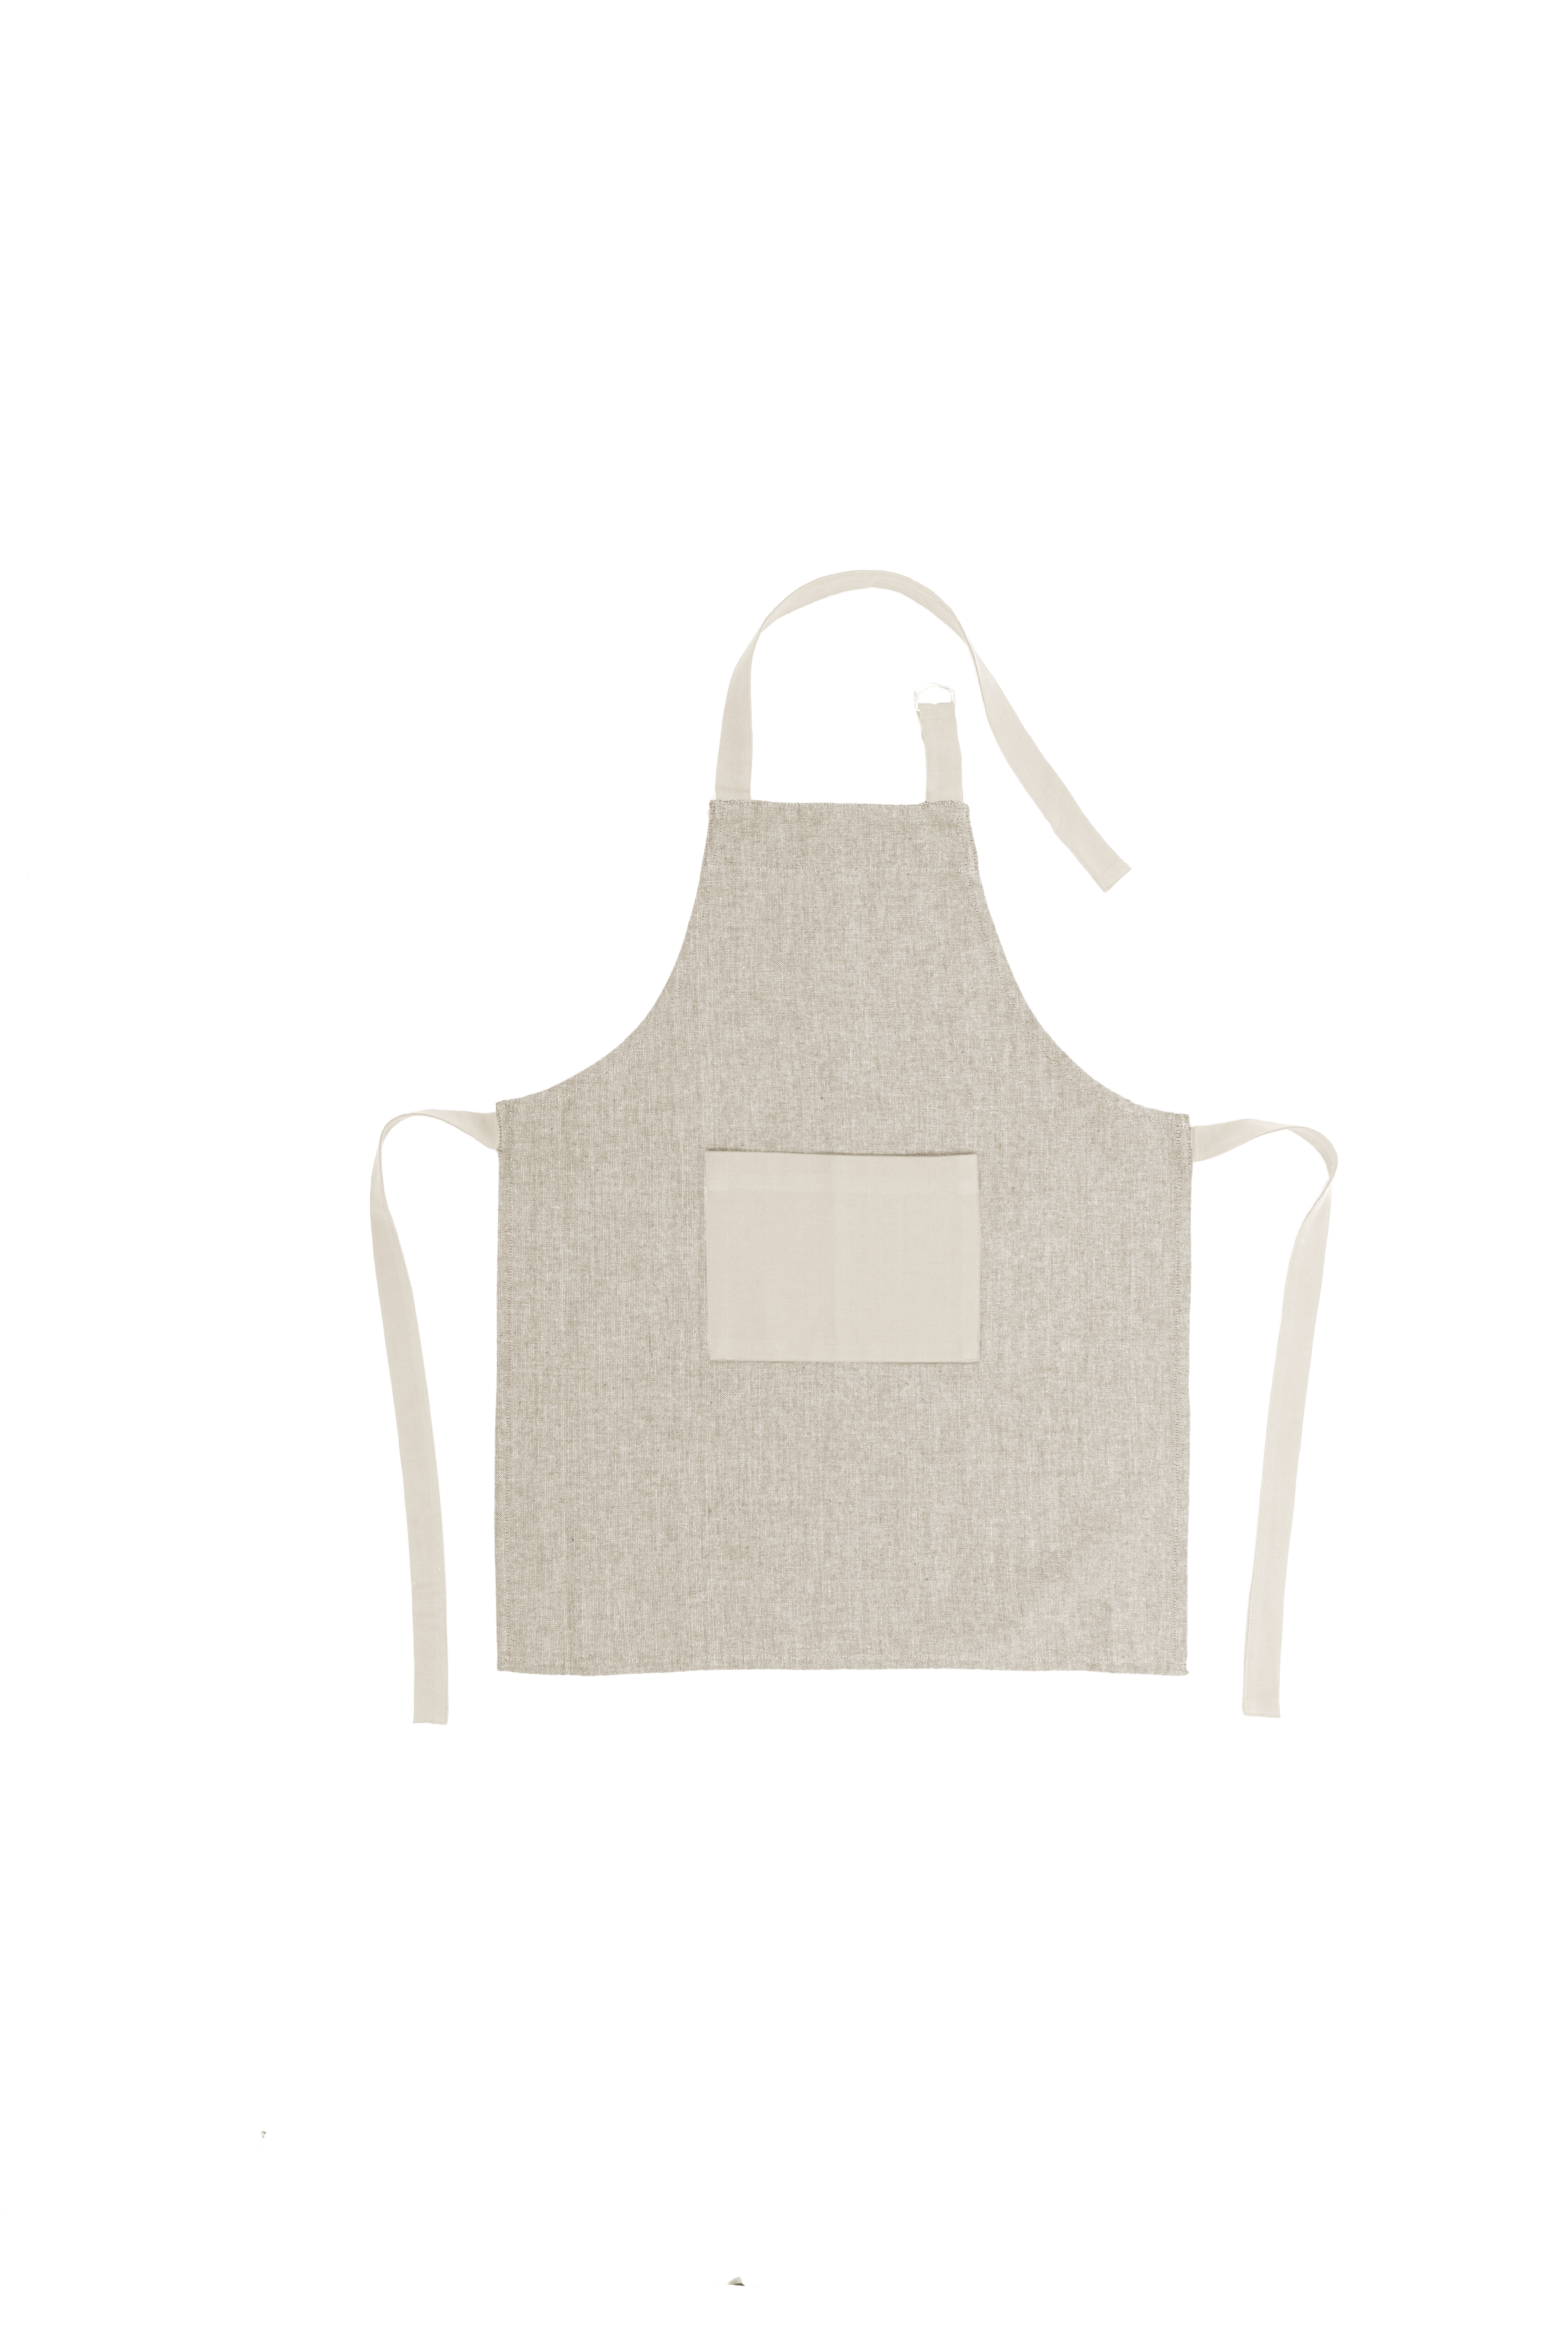 Kinderschort  CHAMBRAY 52x63cm, taupe